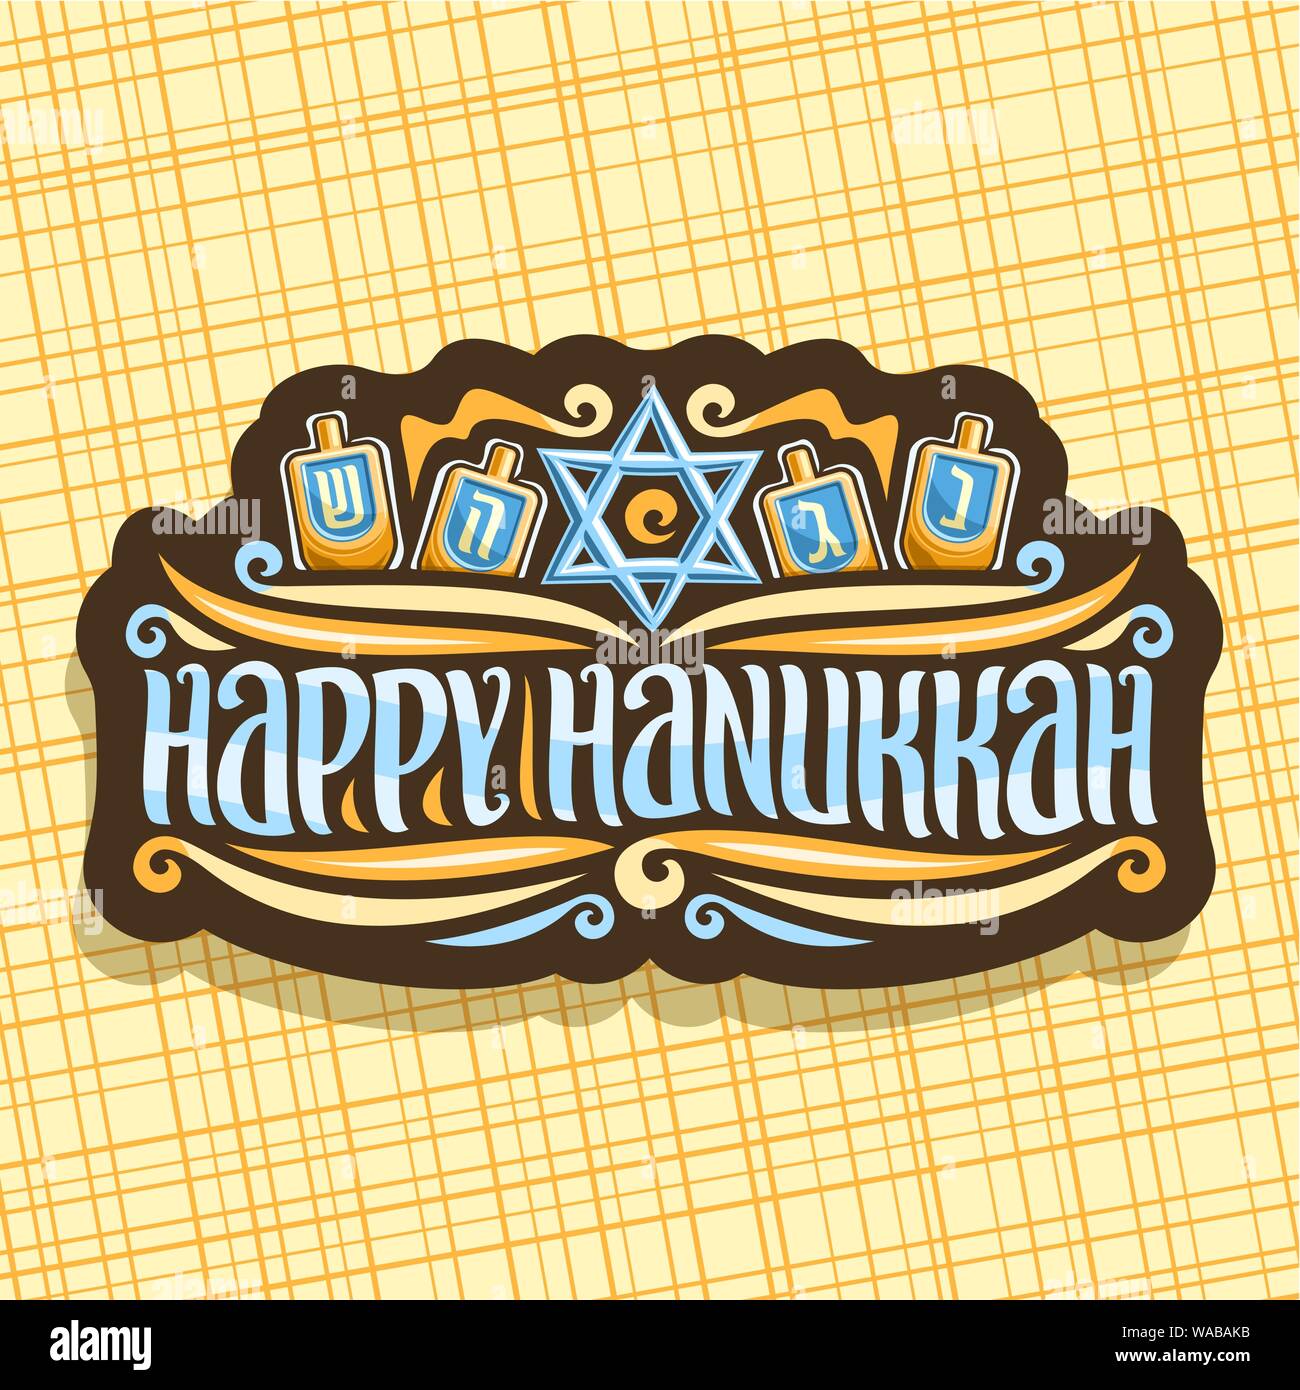 Vector logo for Hanukkah, dark label with blue star of David, 4 traditional spinning kids toys, decorative retro sticker with original brush lettering Stock Vector